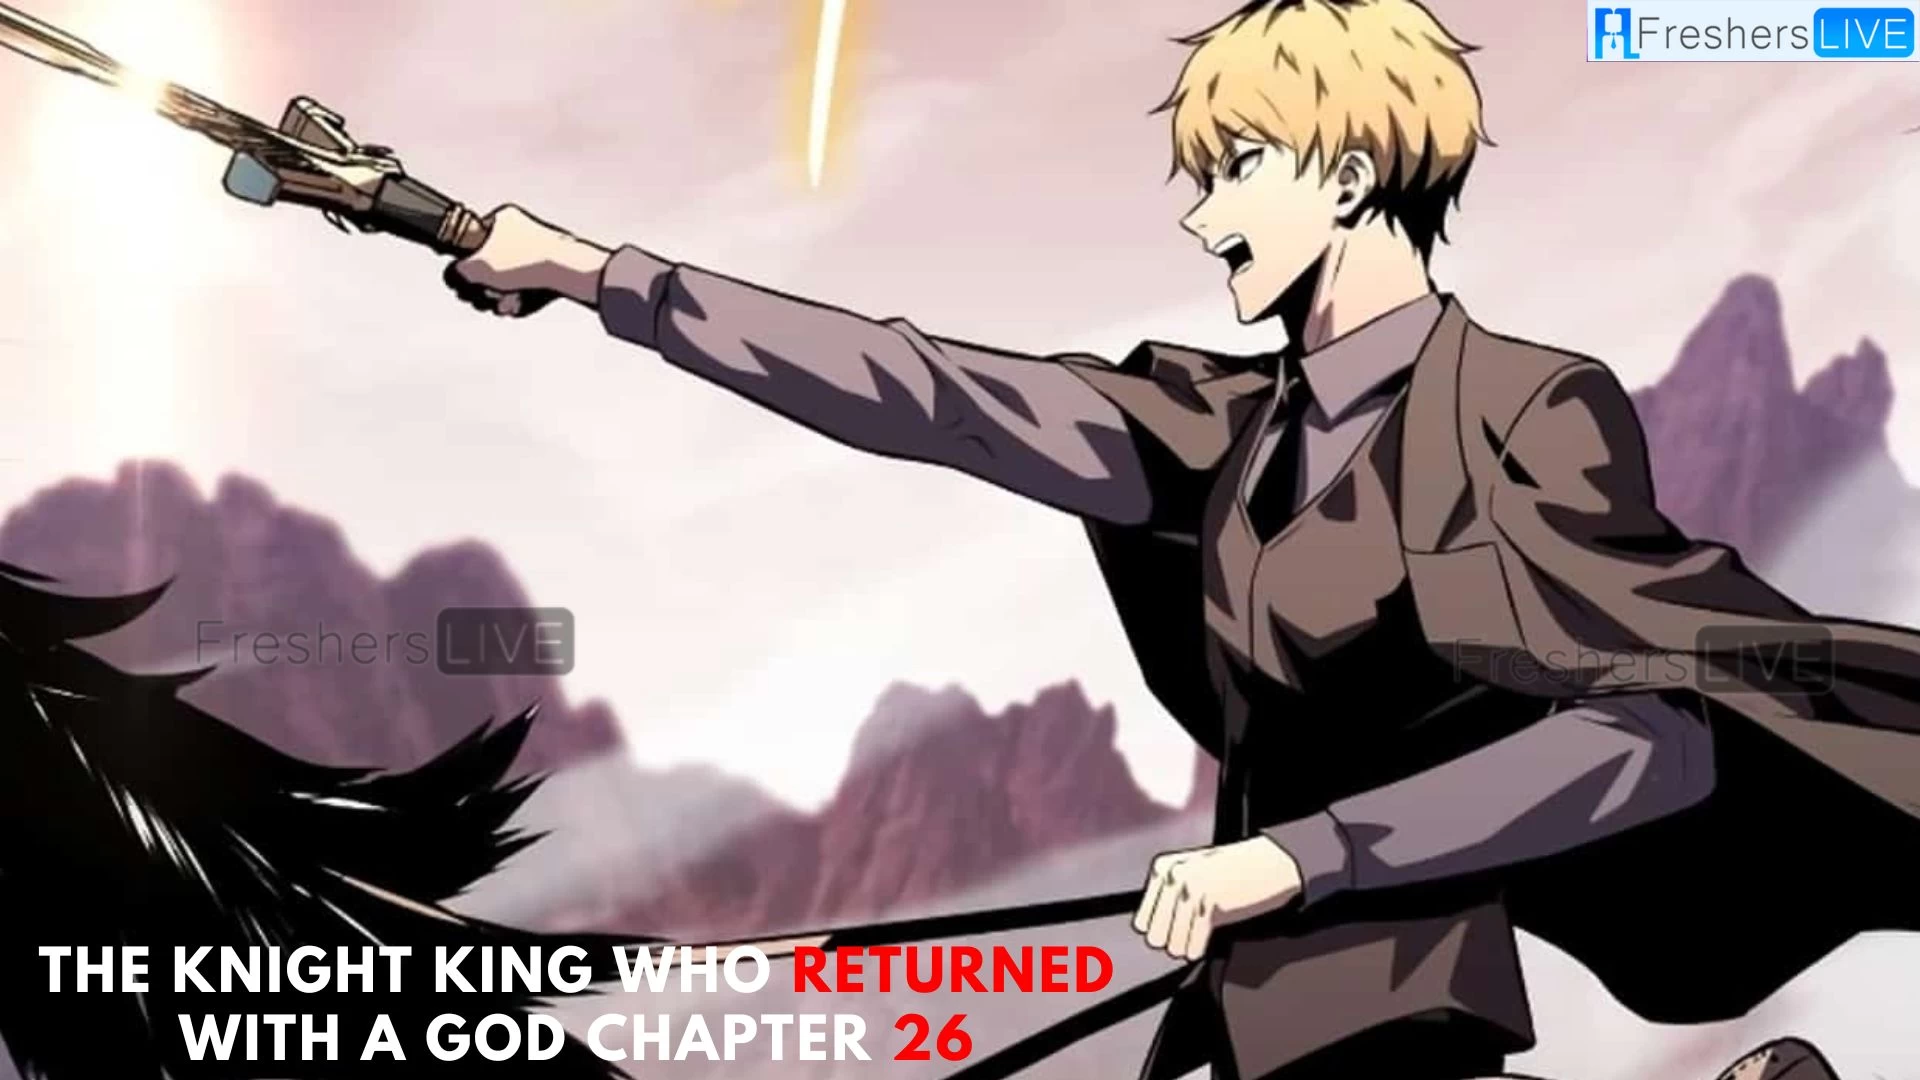 The Knight King Who Returned with a God Chapter 26 Spoilers, Raw Scan, Release Date, and Where to Read The Knight King Who Returned with a God Chapter 26?